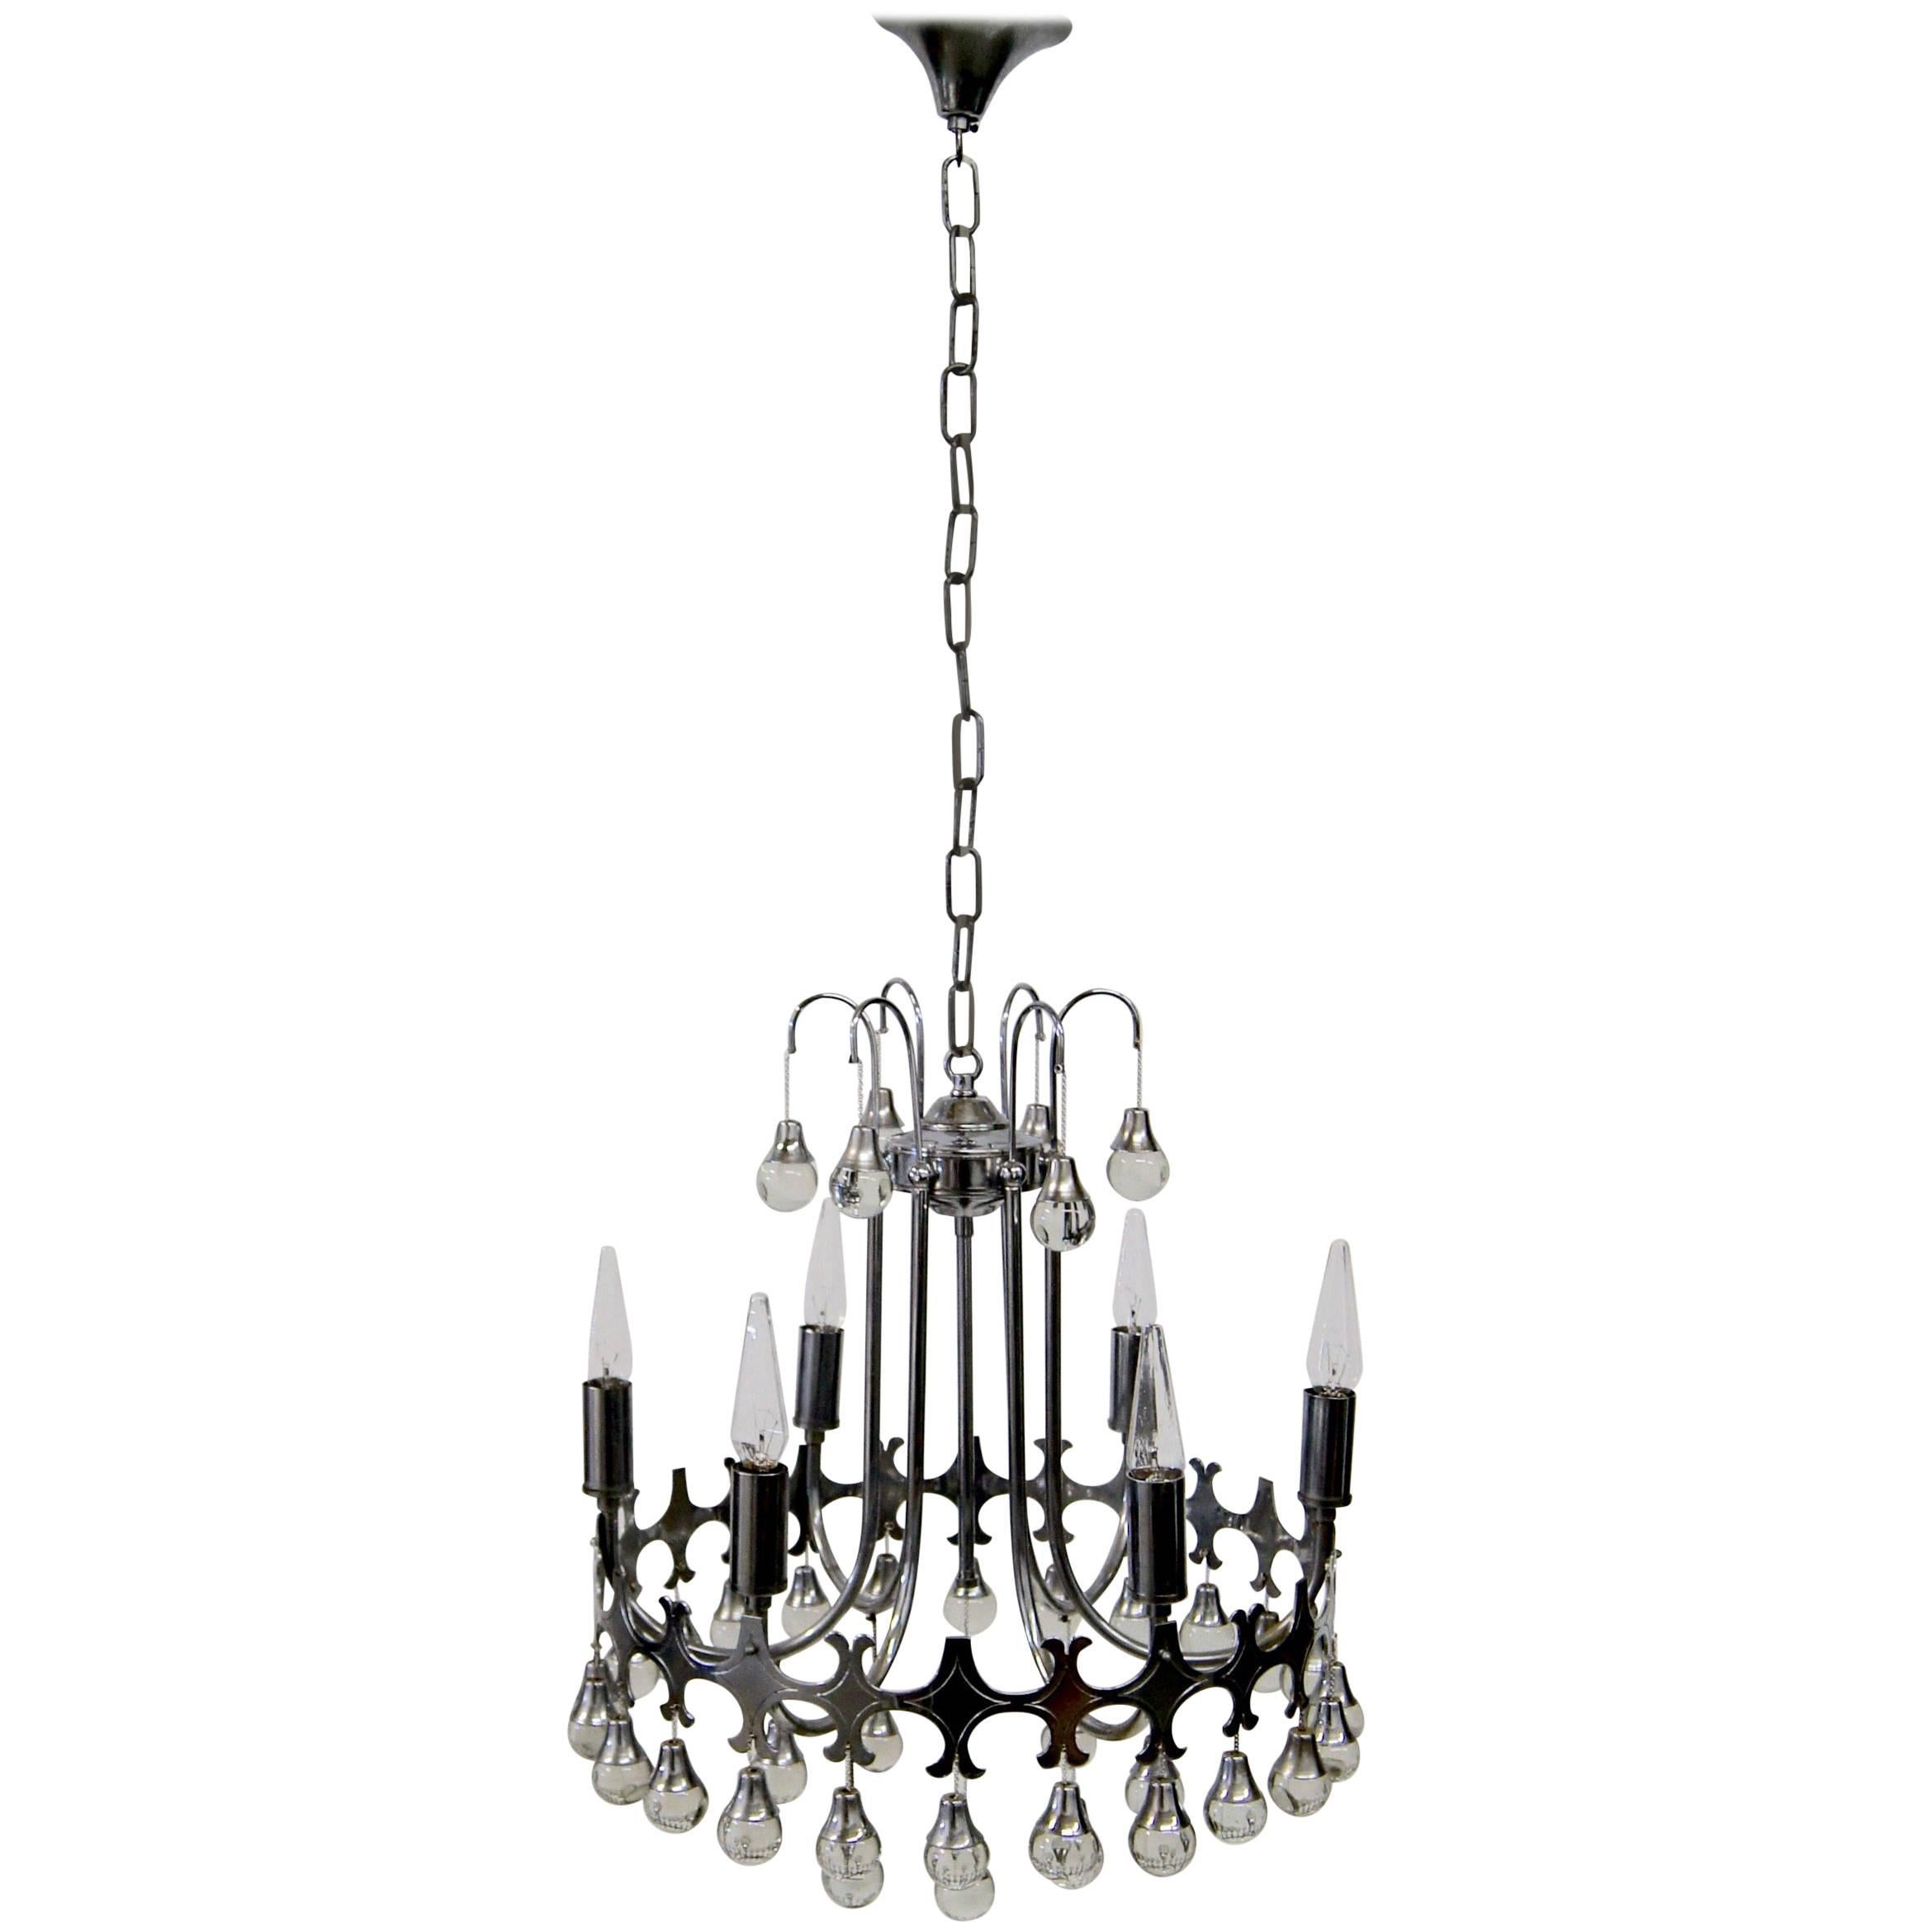 Chrome-plated Italian chandelier with six-light fittings. It is decorated with glass spheres that dangle from small chains attached to the structure.